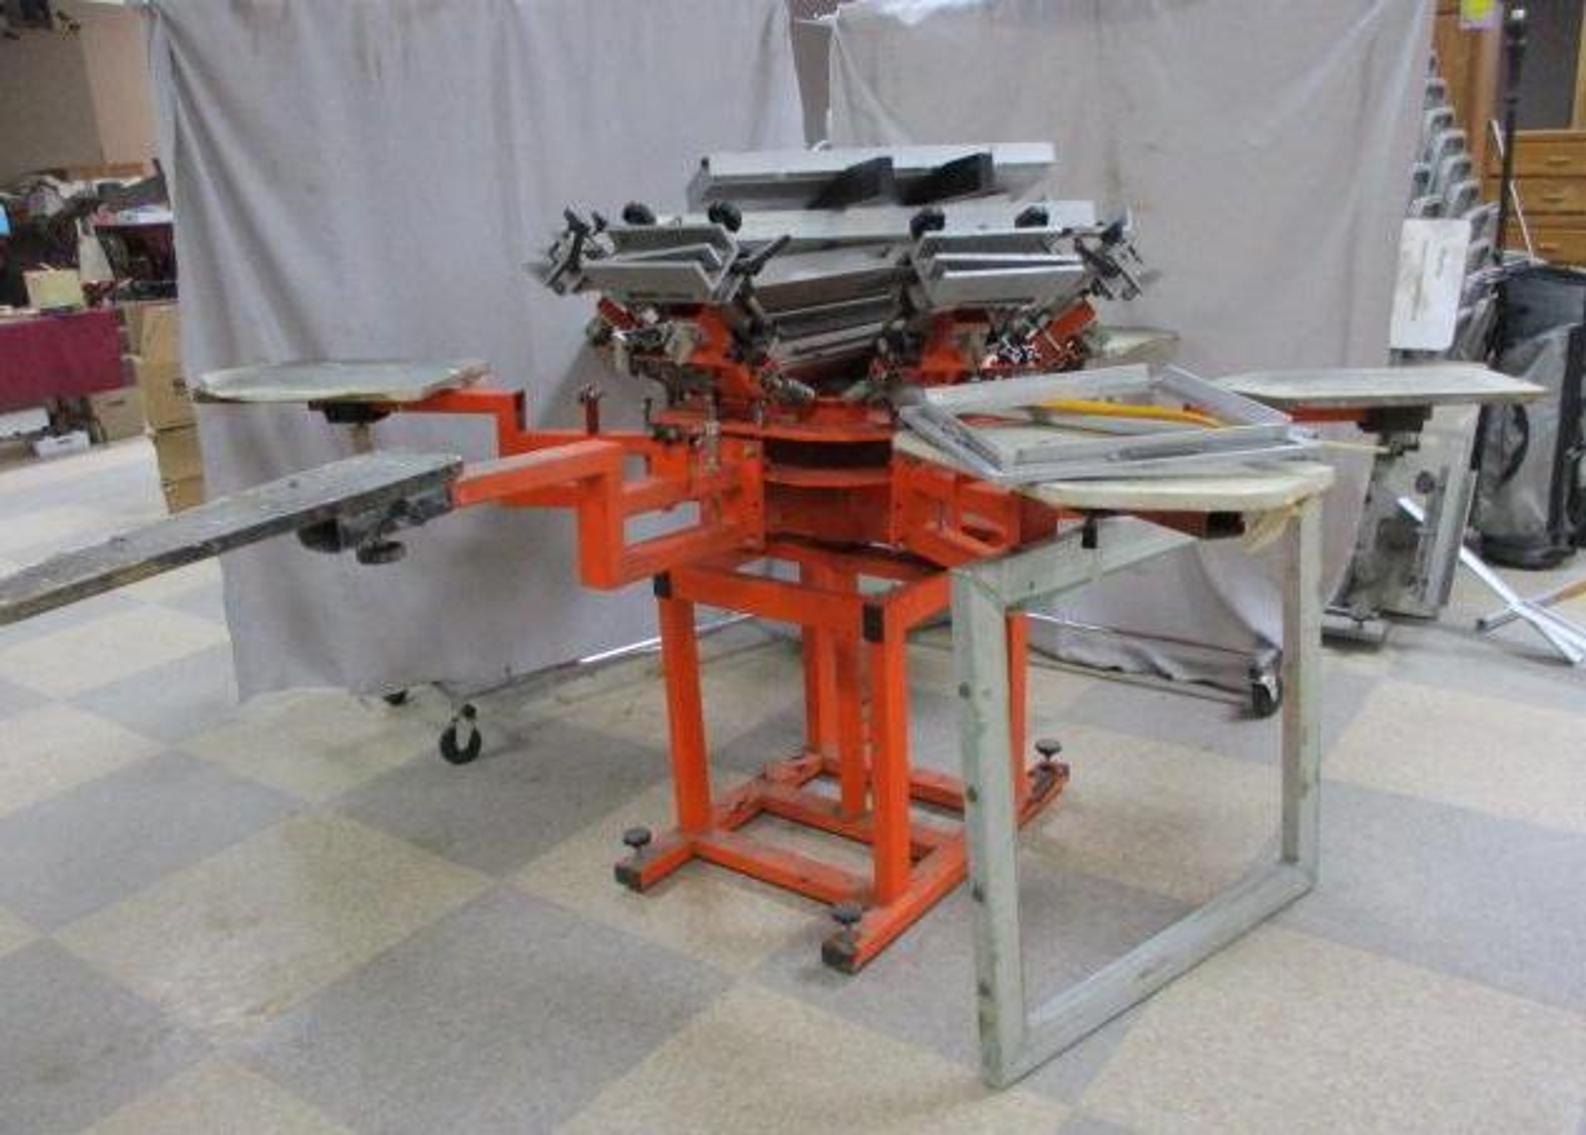 Silk Screening Press and Tables, Furniture, Sporting Goods, Lawn and Garden, Household and More